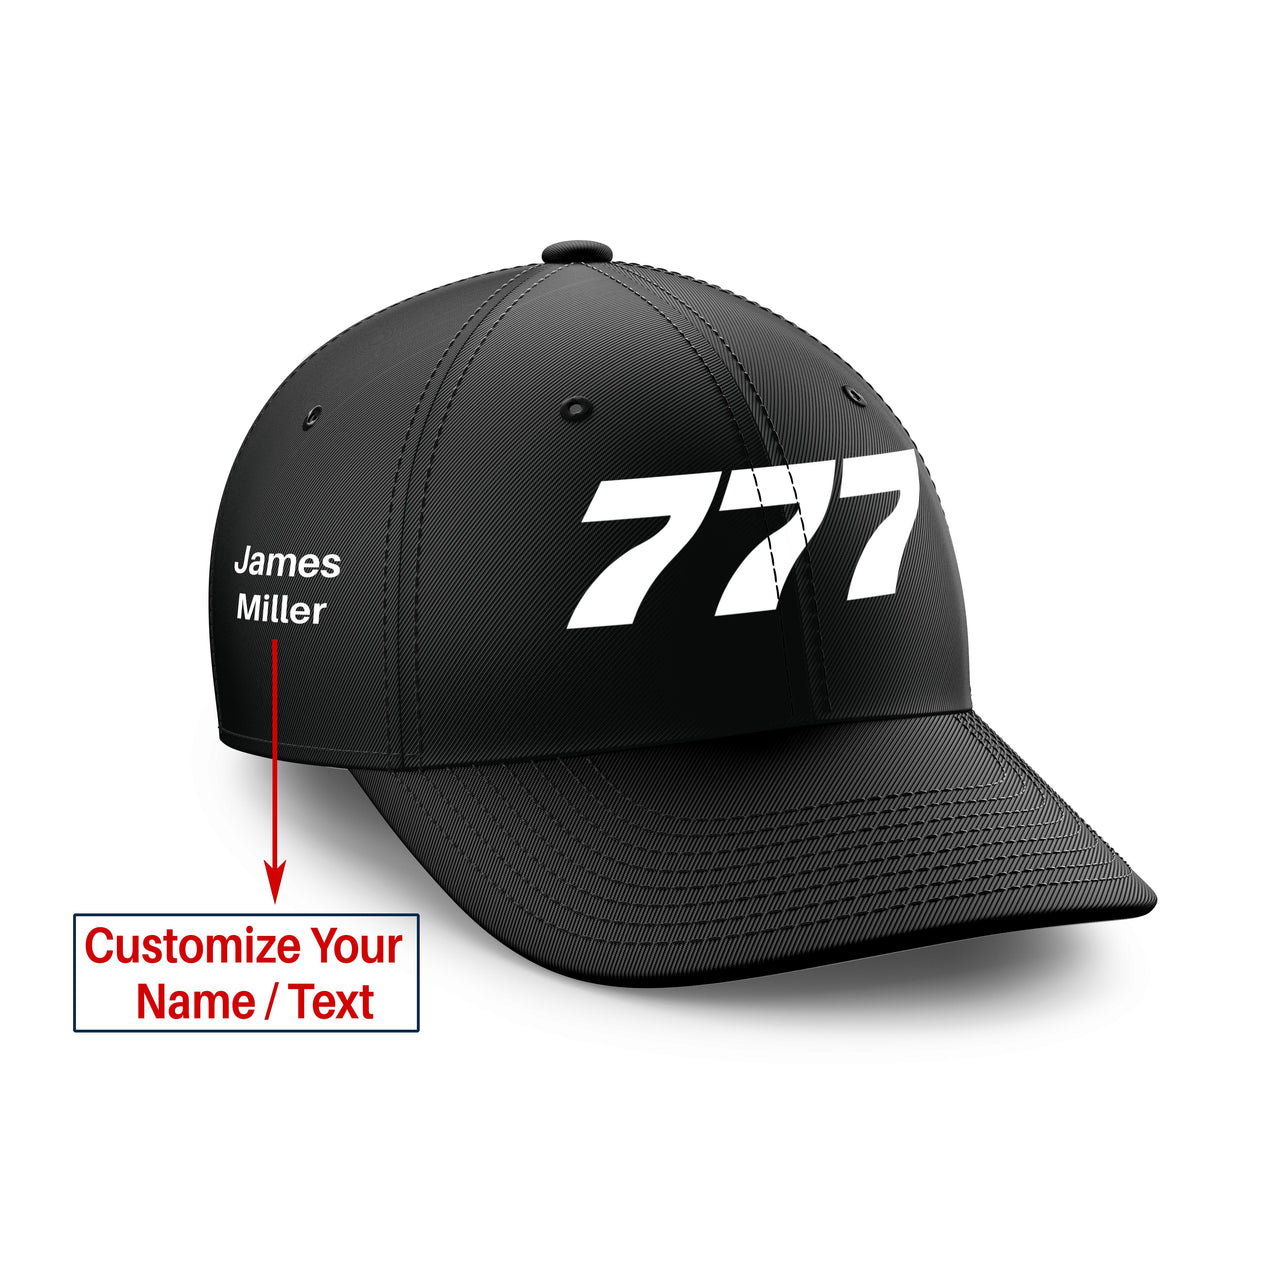 Customizable Name & 777 Flat Text Embroidered Hats